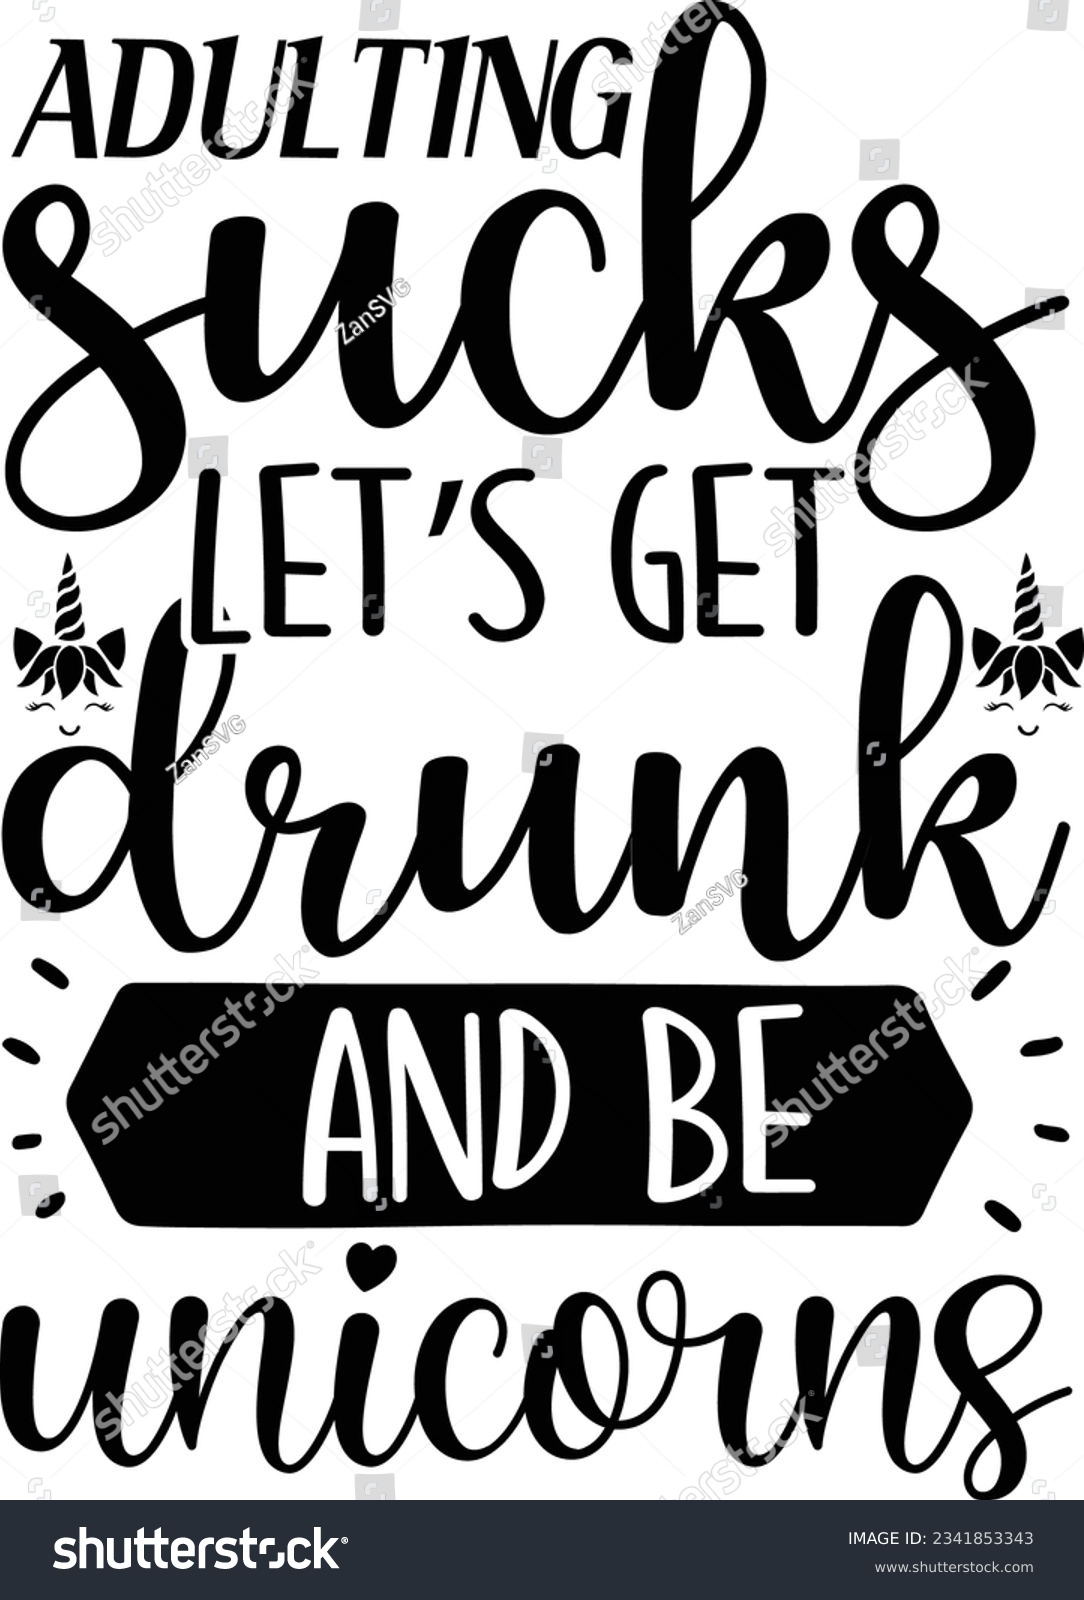 SVG of Adulting sucks let's get drunk and be unicorns vector file, Adulting Funny svg svg